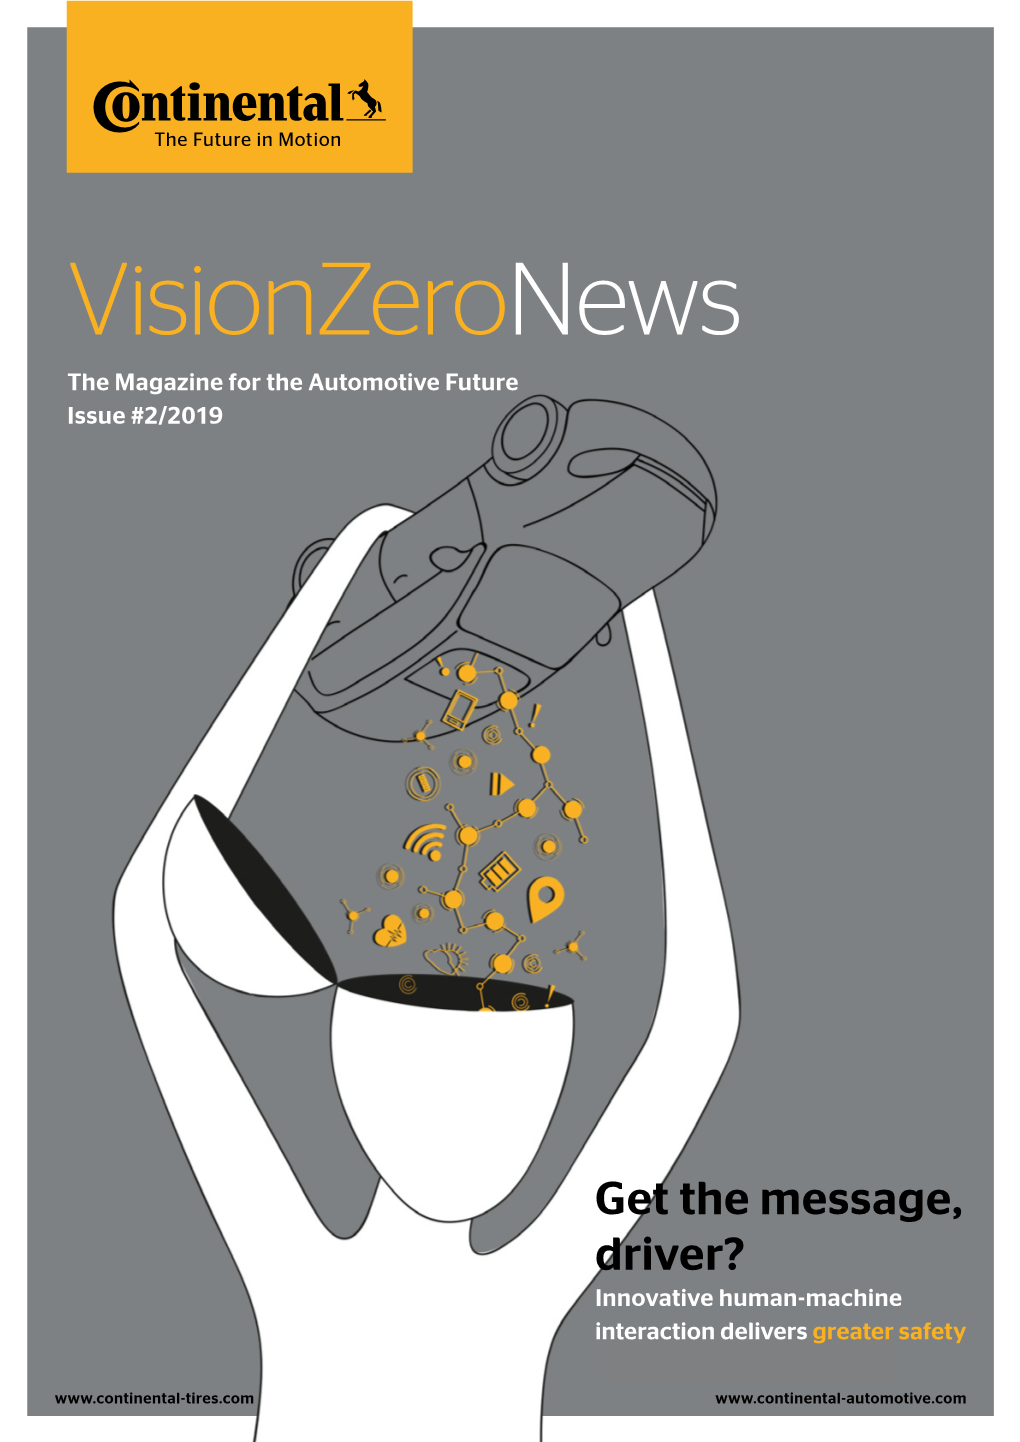 Visionzeronews the Magazine for the Automotive Future Issue #2/2019